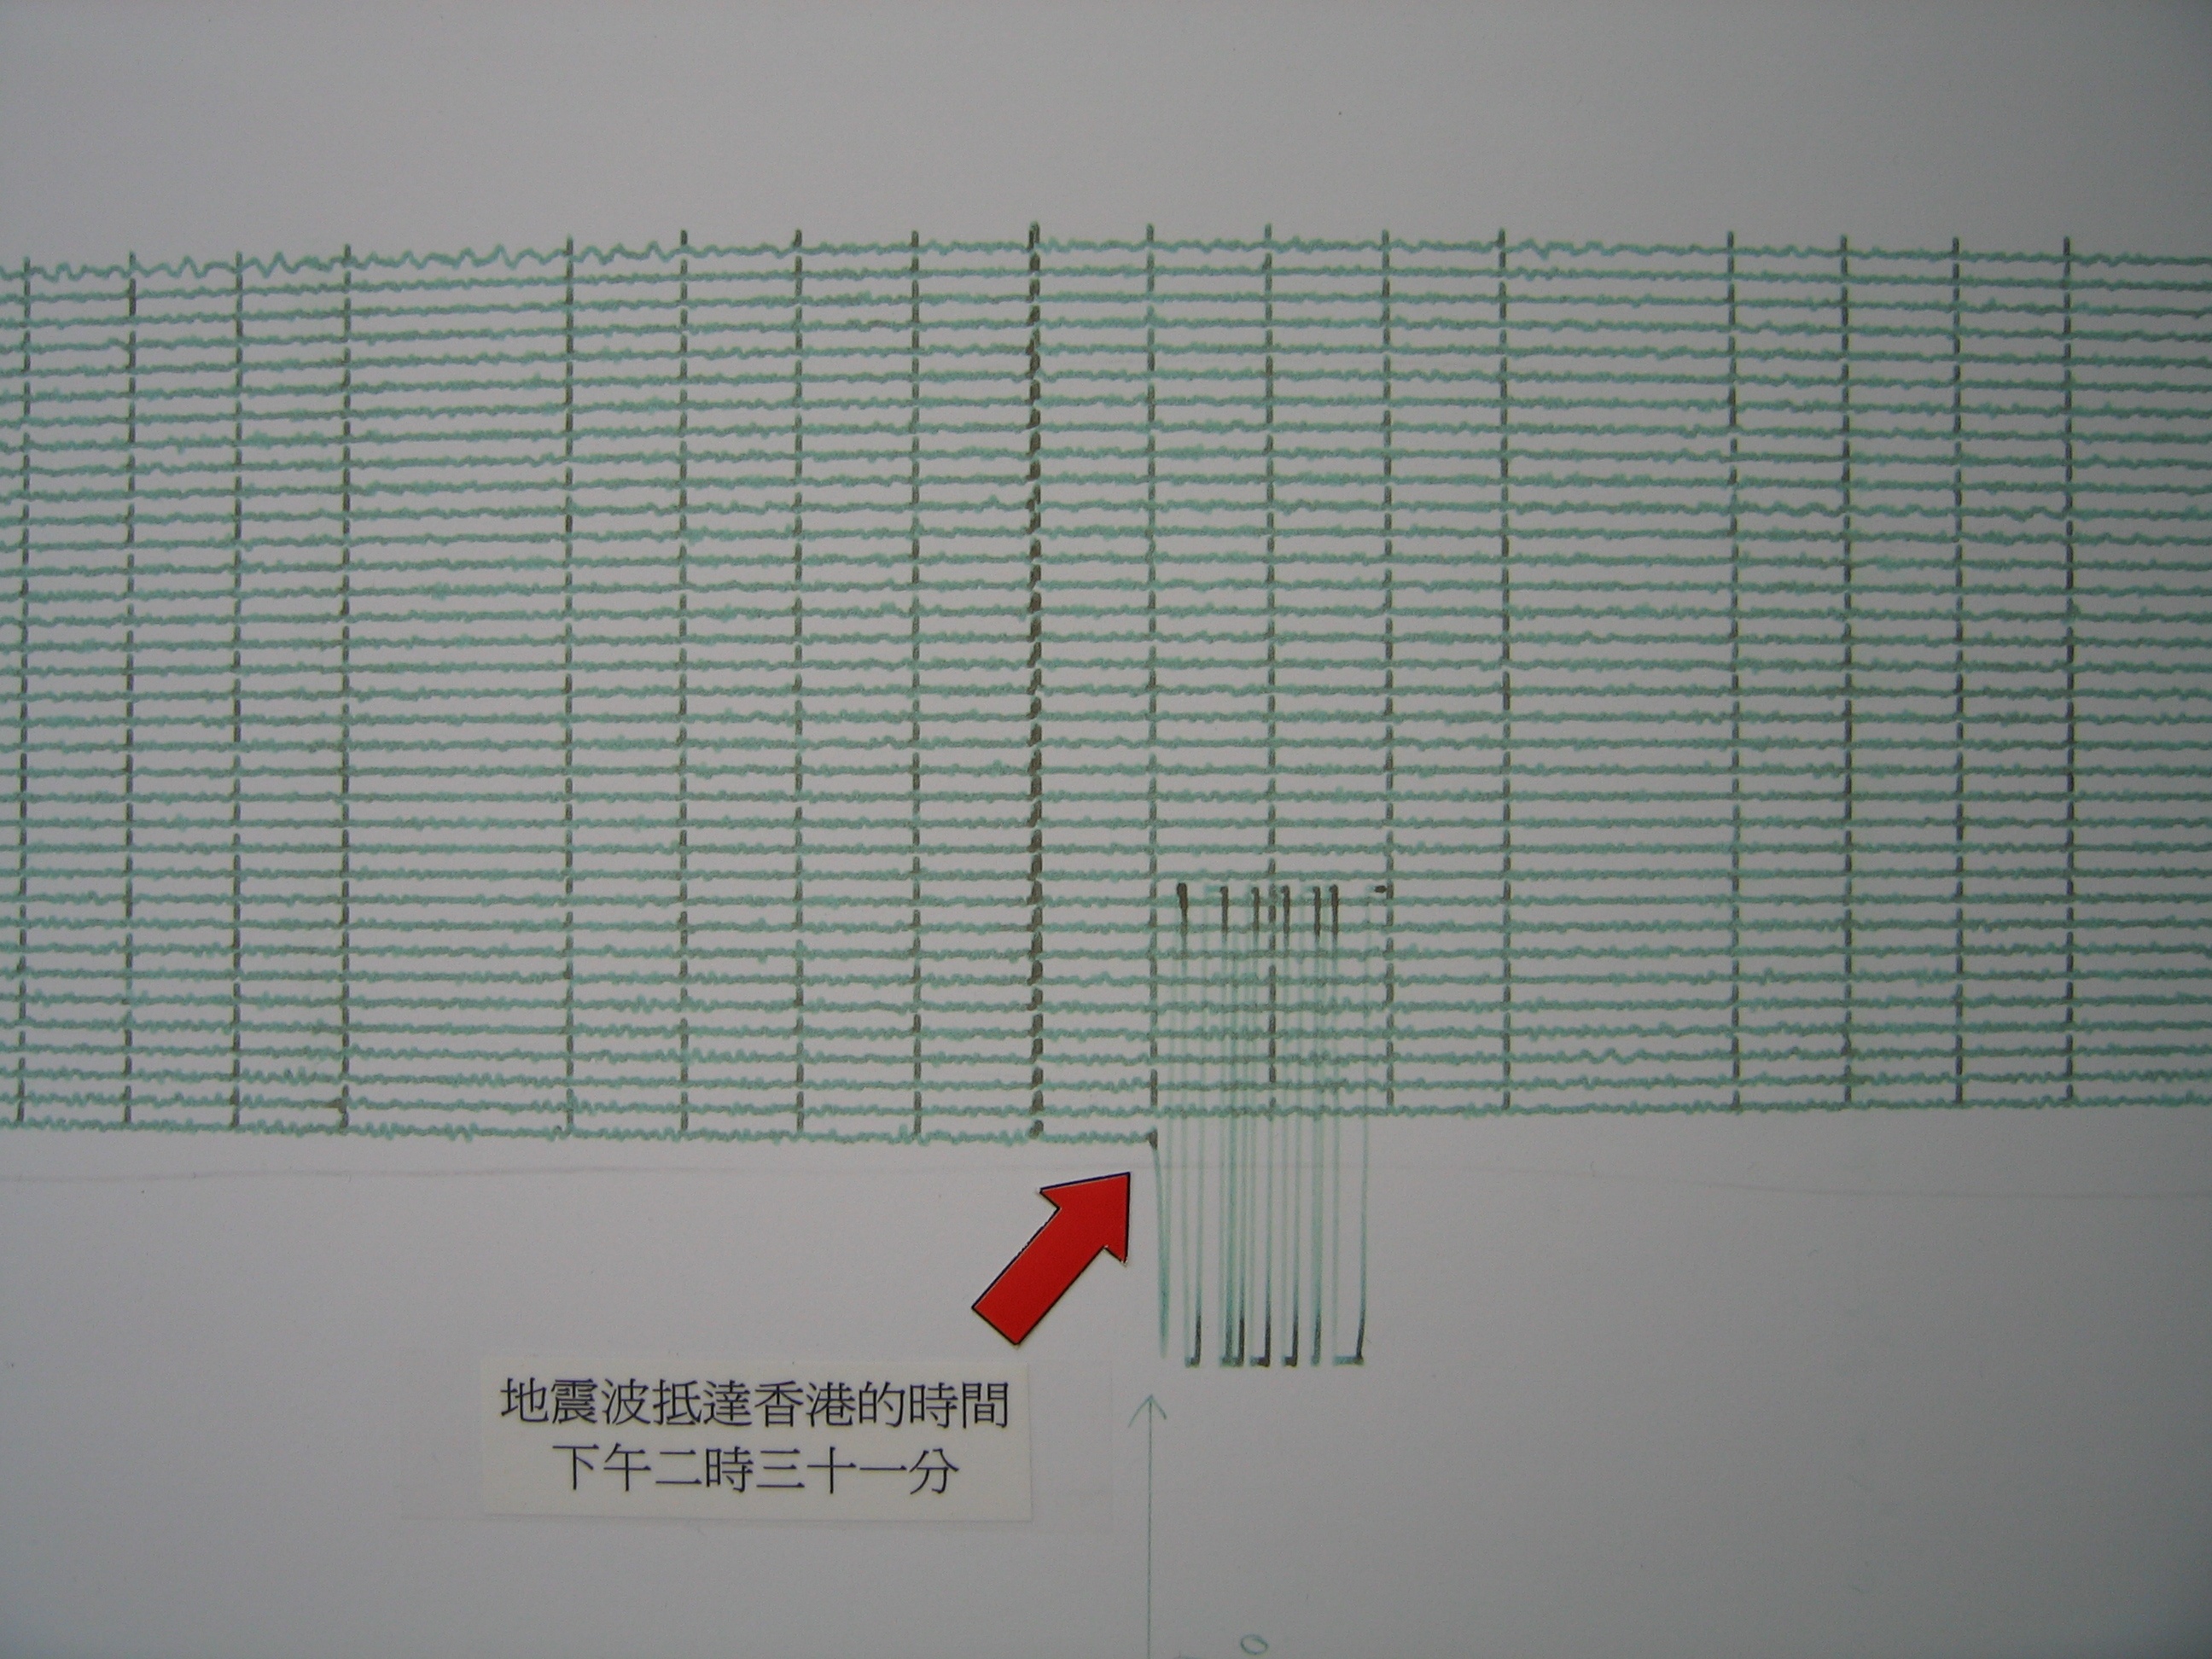 Figure 2: Seismogram recorded by the Lamont-Doherty seismograph during the Wenchuan Earthquake in 2008.